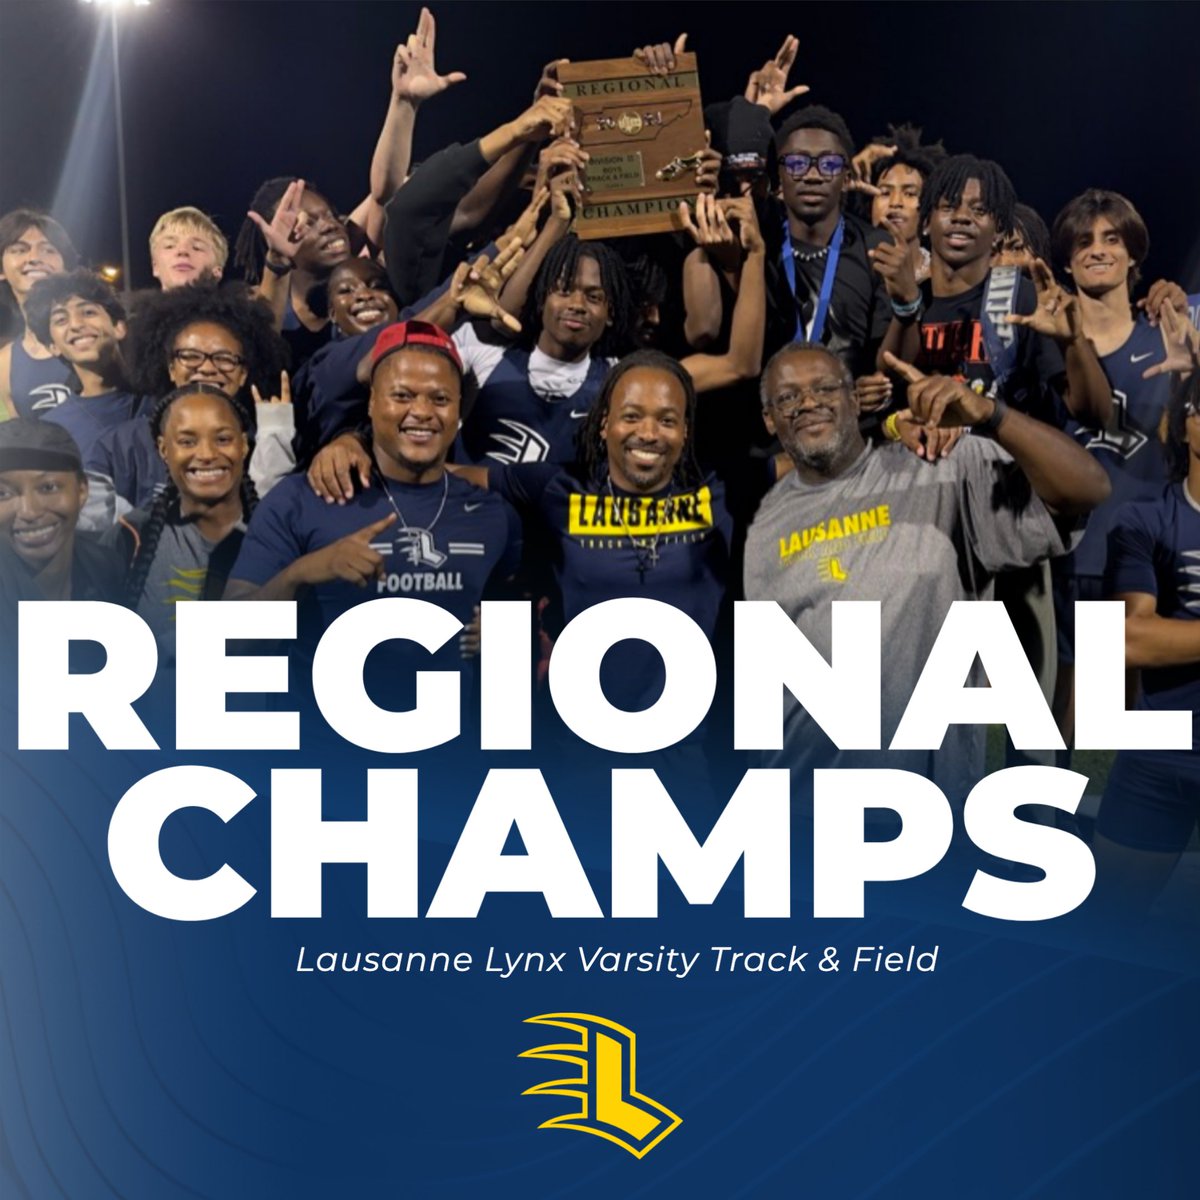 The boys track team punched 17 tickets in 10 events en route to the regional title Friday night for the boys, the first in school history. #LetsGoLynx #BeGreat